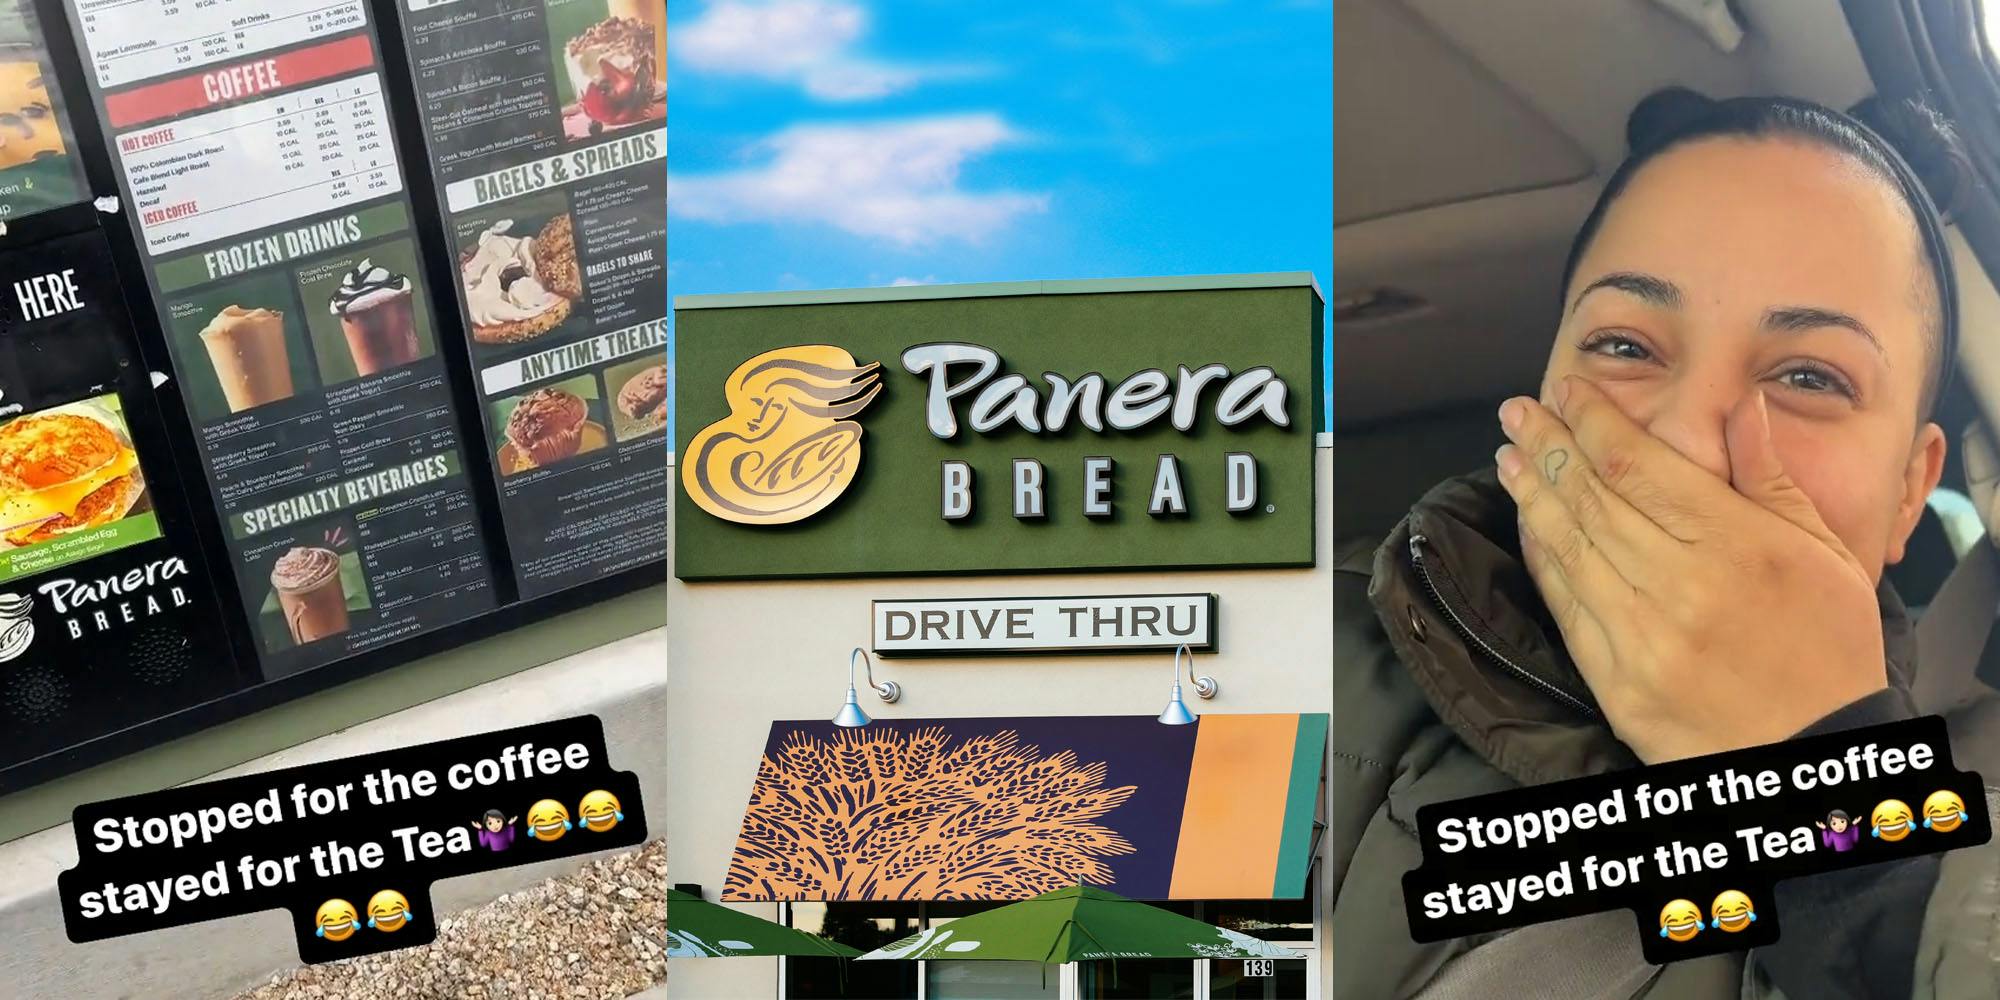 Panera drive thru with caption "Stopped for the coffee stayed for the tea" (l) Panera Bread Drive Thru sign on building (c) woman in car with hand on mouth caption "Stopped for the coffee stayed for the tea" (r)